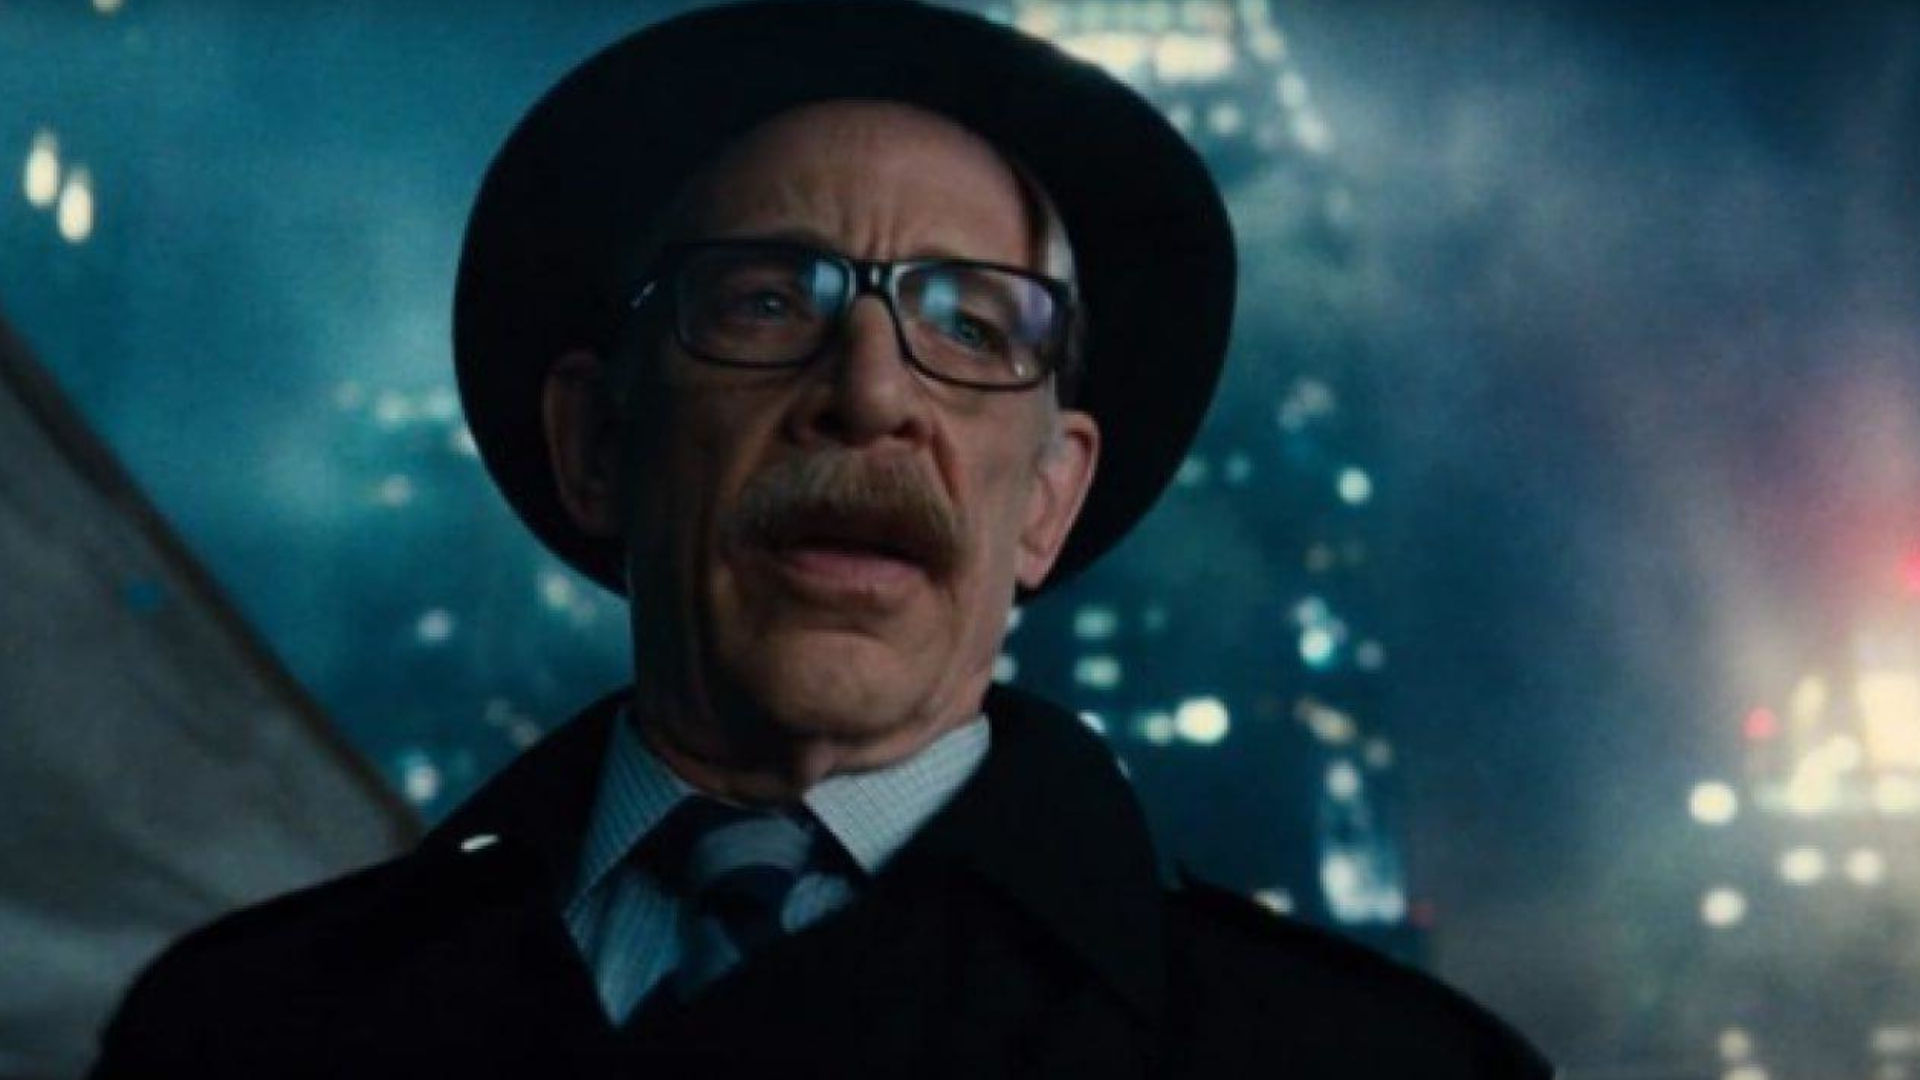 Batgirl movie shows new side to Commissioner Gordon, says JK Simmons